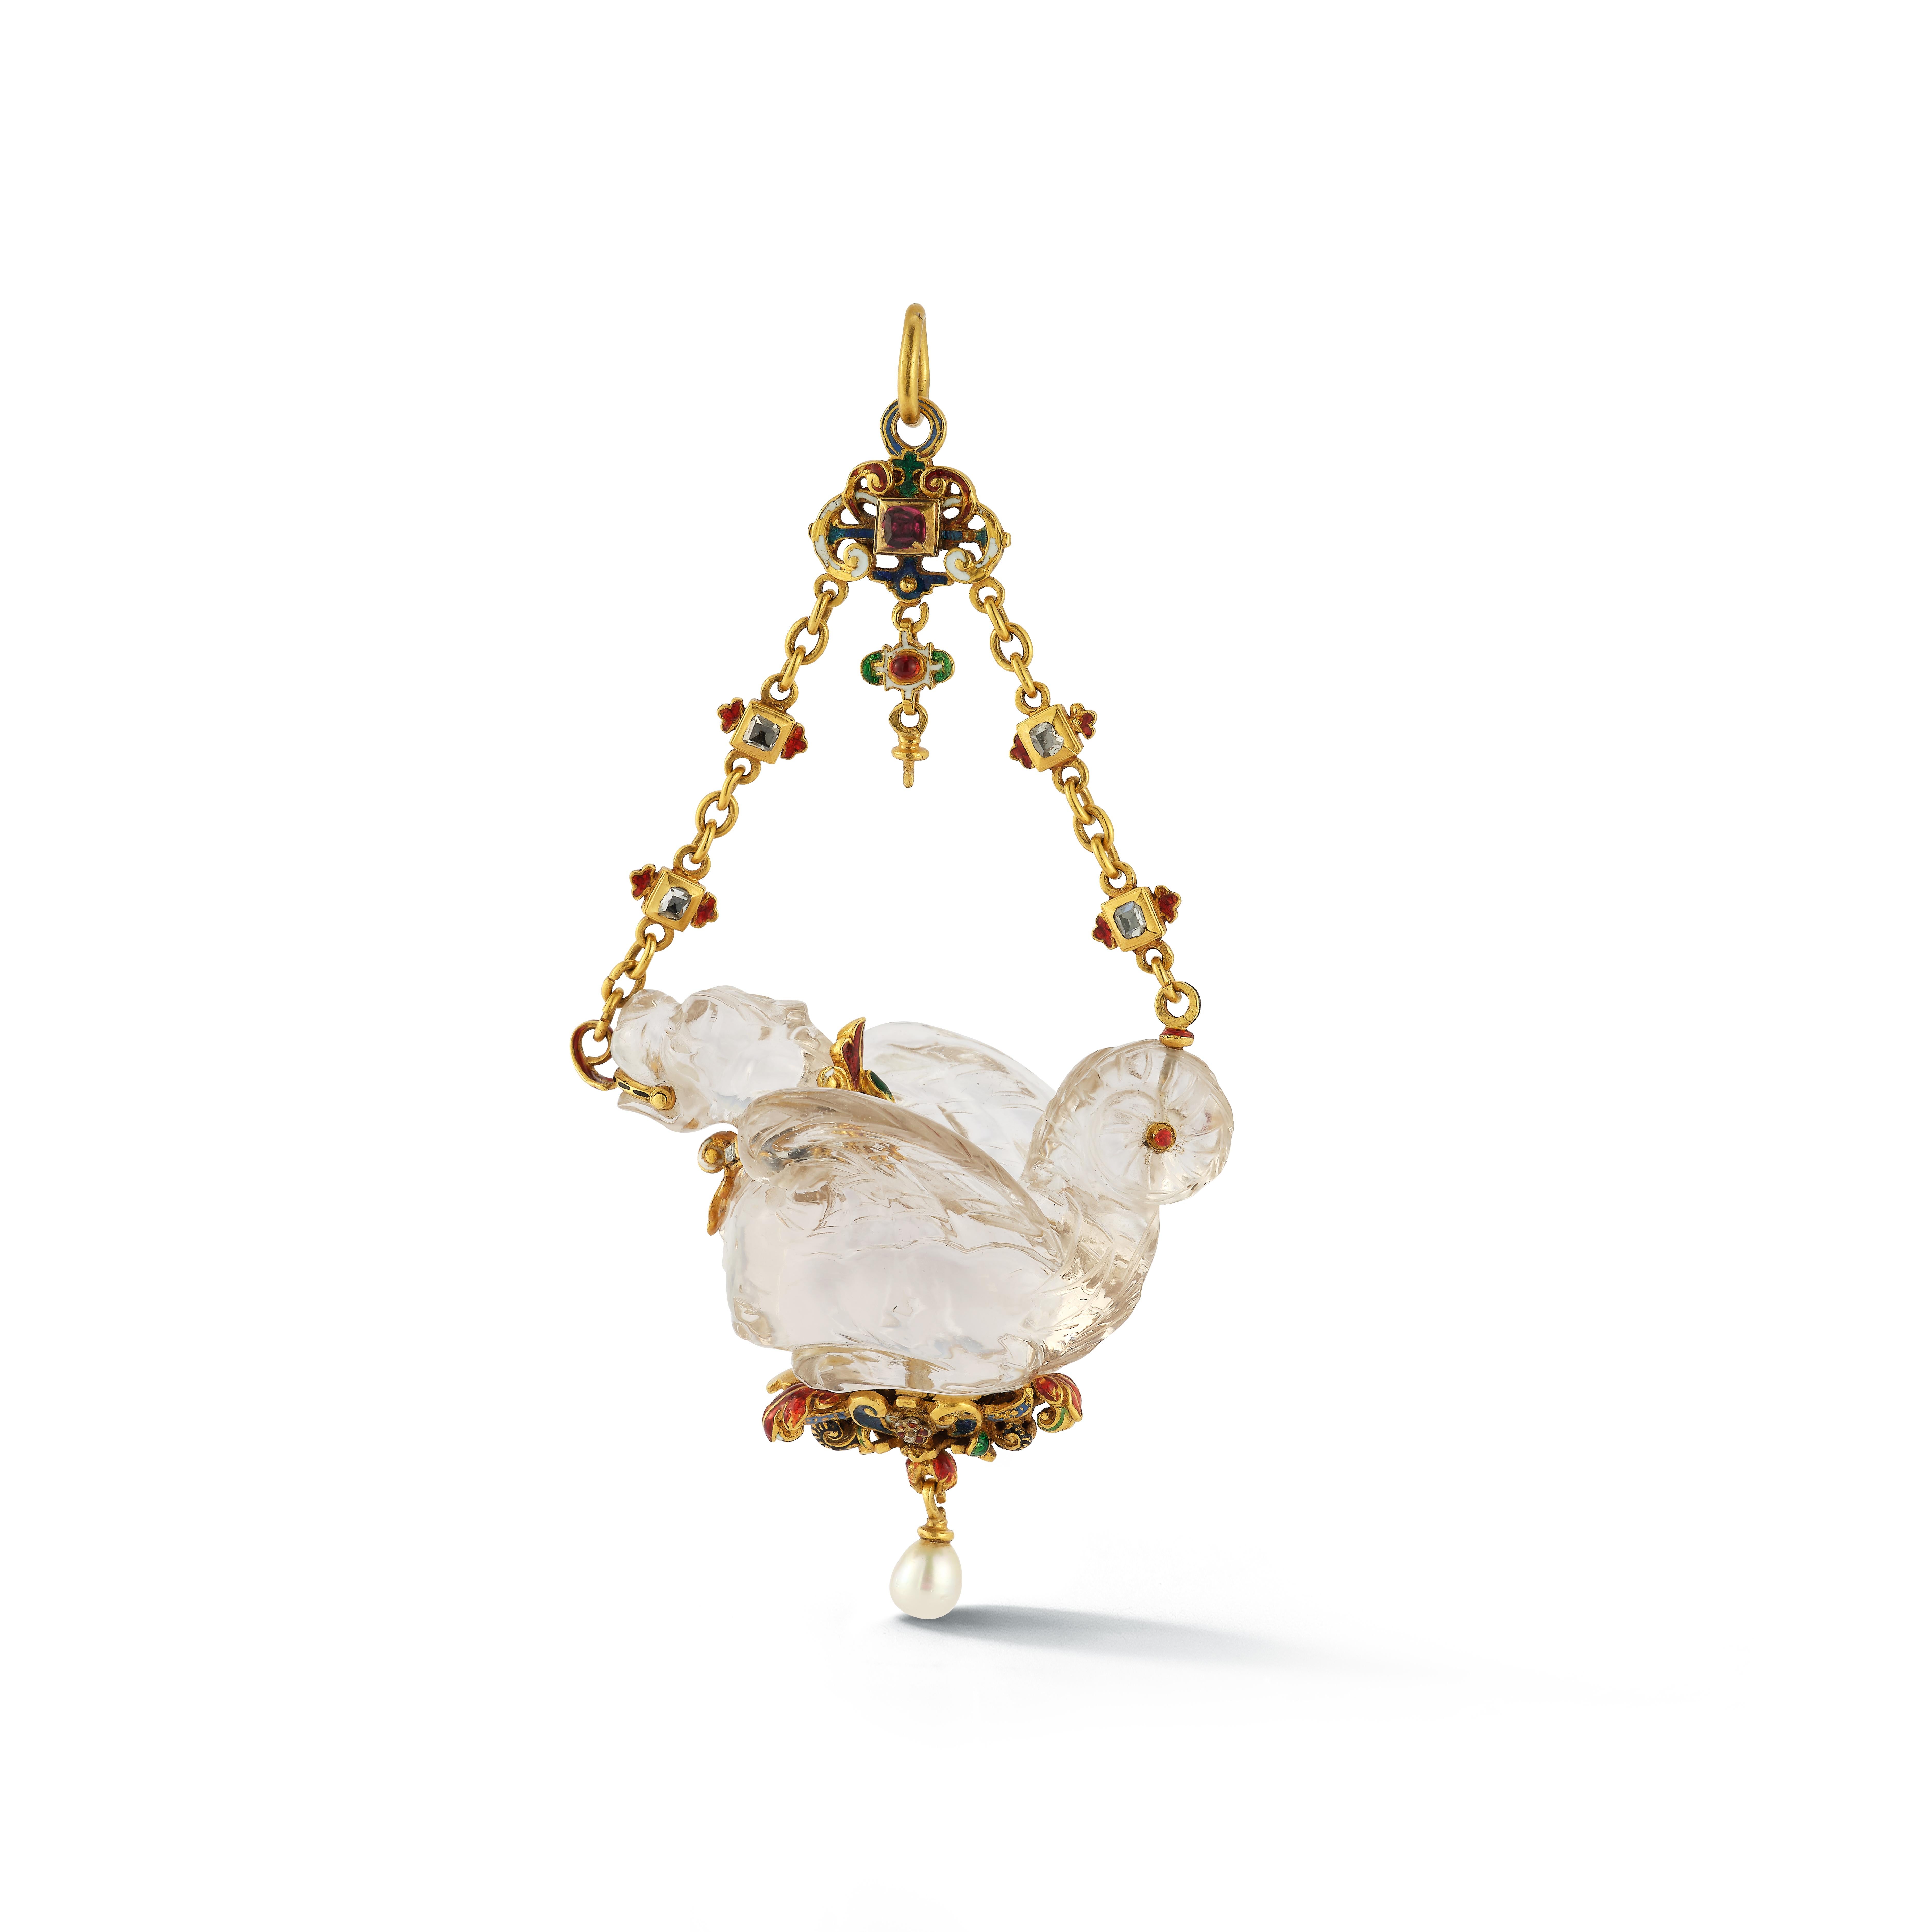 Renaissance Revival Rock Crystal Dragon Pendant-

A rock crystal dragon mounted in 18k gold set with diamonds, a pearl, and rubies

Length: 4.5